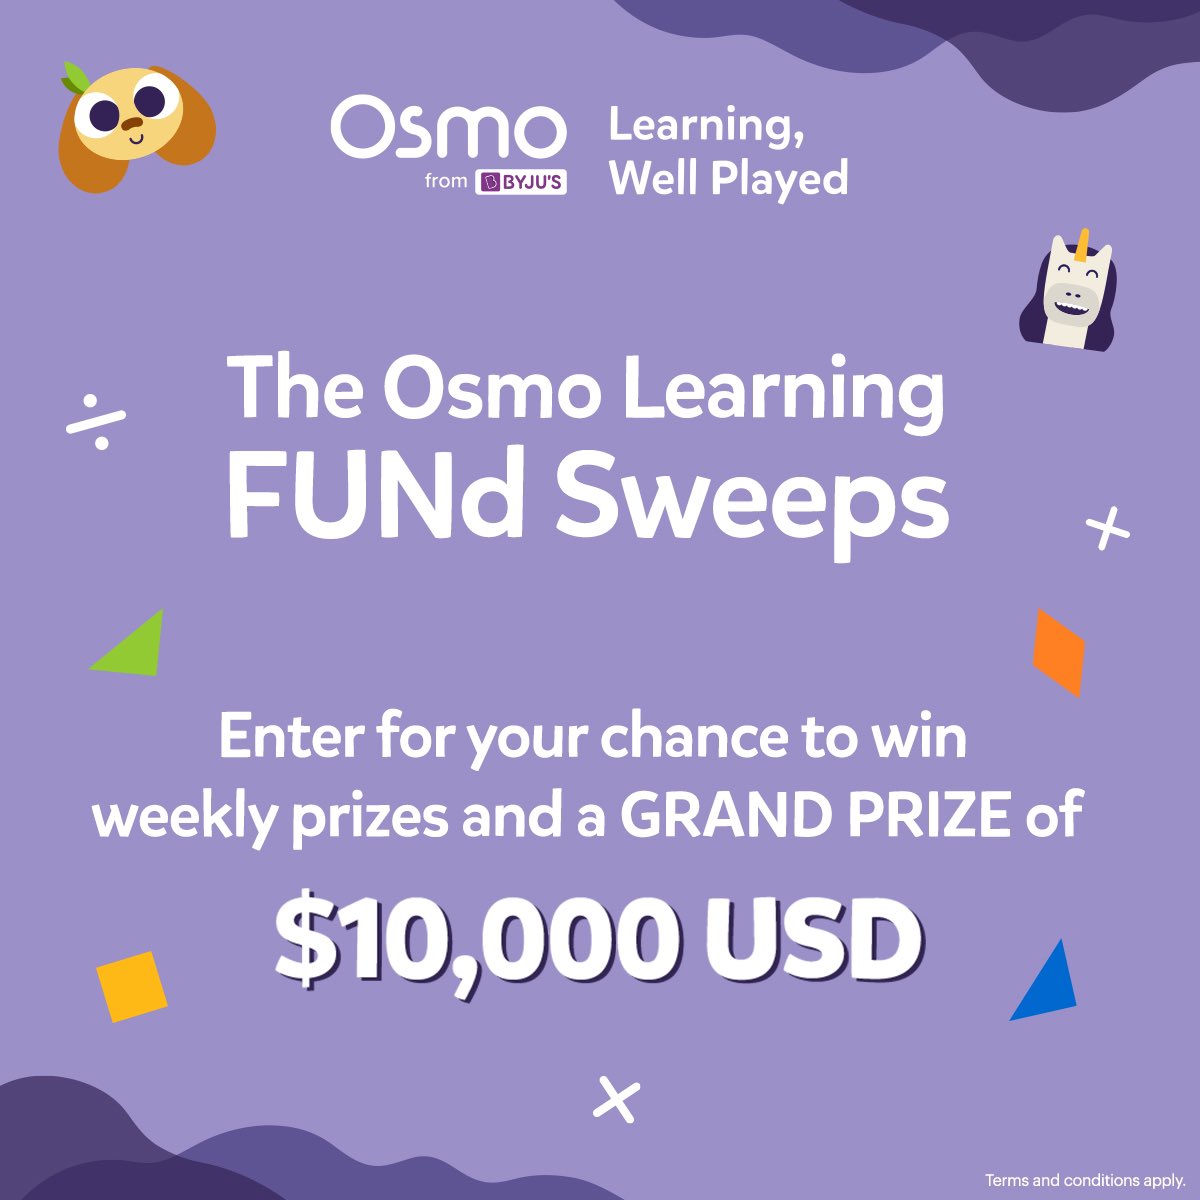 Have you entered the @PlayOsmo FUNd Sweeps? Check it out here! playosmo.com/en/lp/sweepsta… #MeetOsmo #LearningWellPlayed #OsmoAllStars #OsmoAmbassador